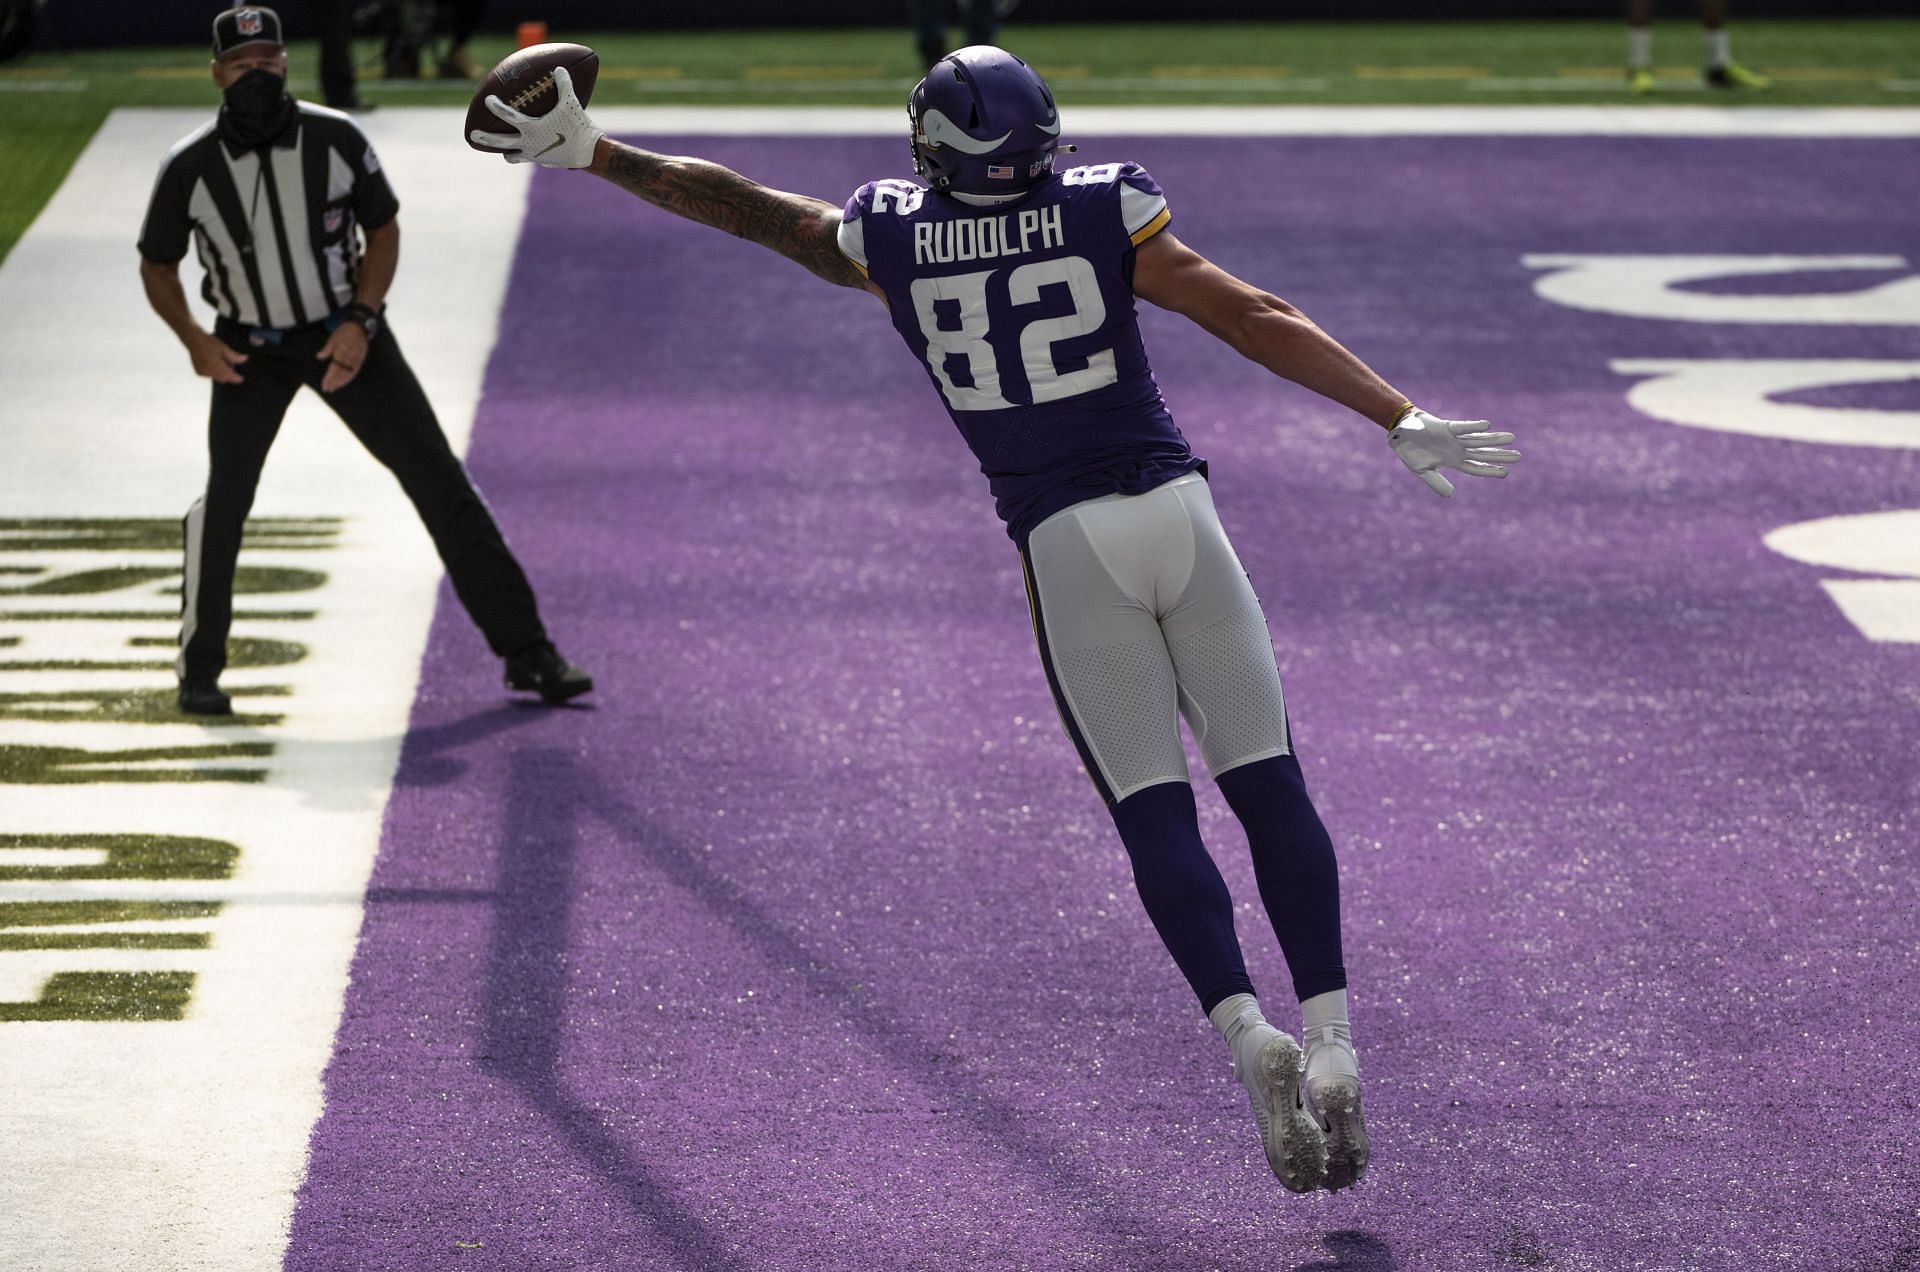 Rudoolph makes a touchdown grab in 2020 (Photo: Getty)